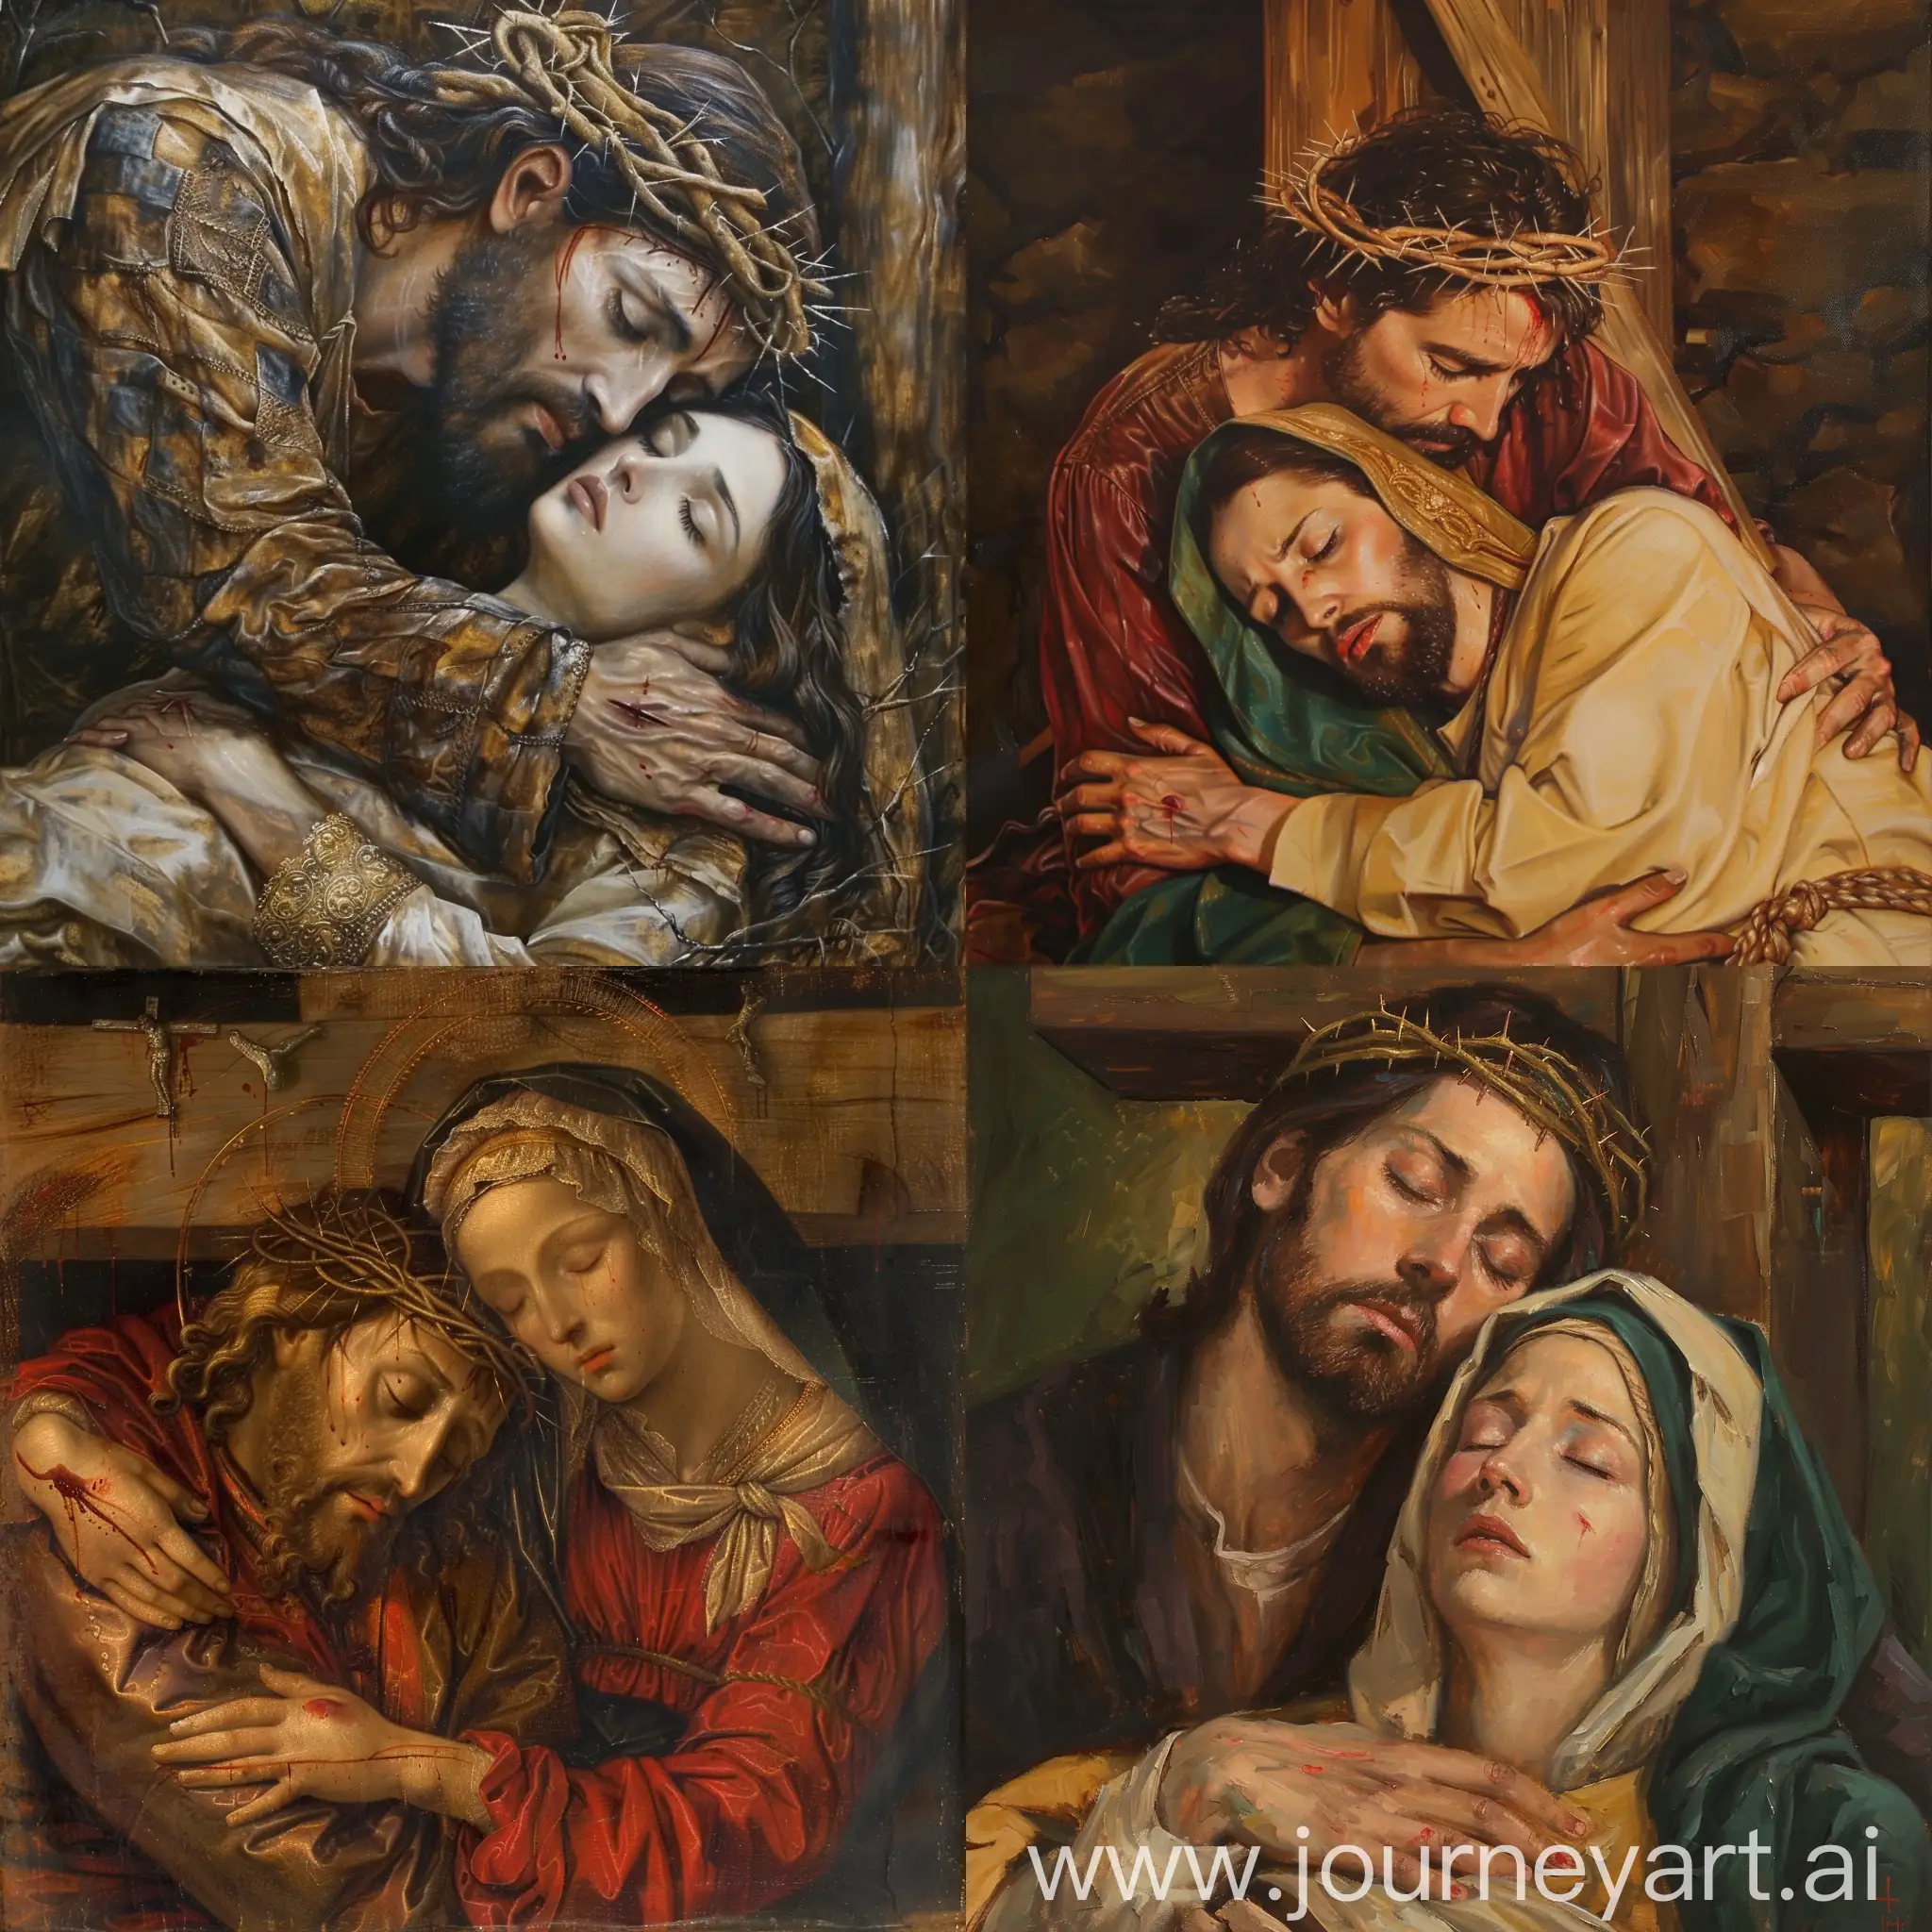 Emotional-Oil-Painting-of-Jesus-Christs-Crucifixion-Embraced-by-Mother-Mary